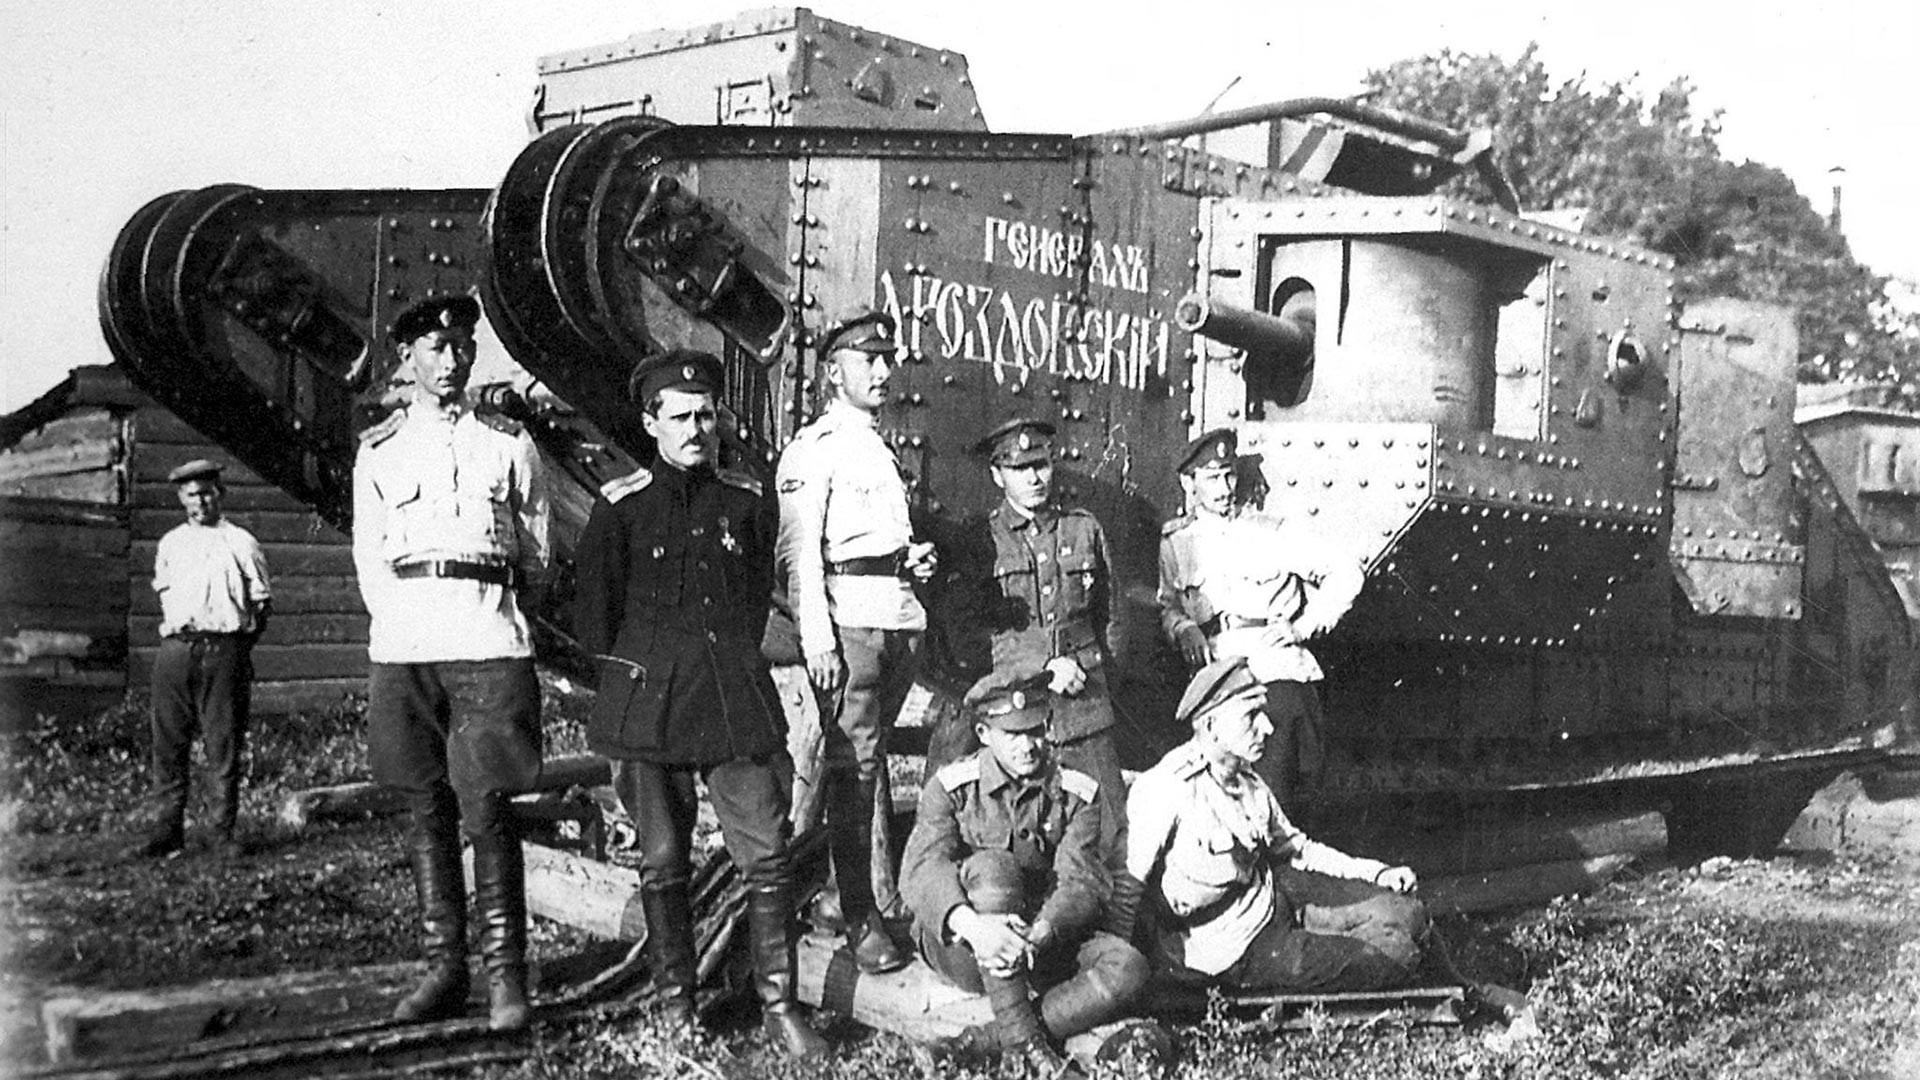 The White Army's "General Drozdovsky" and its crew.